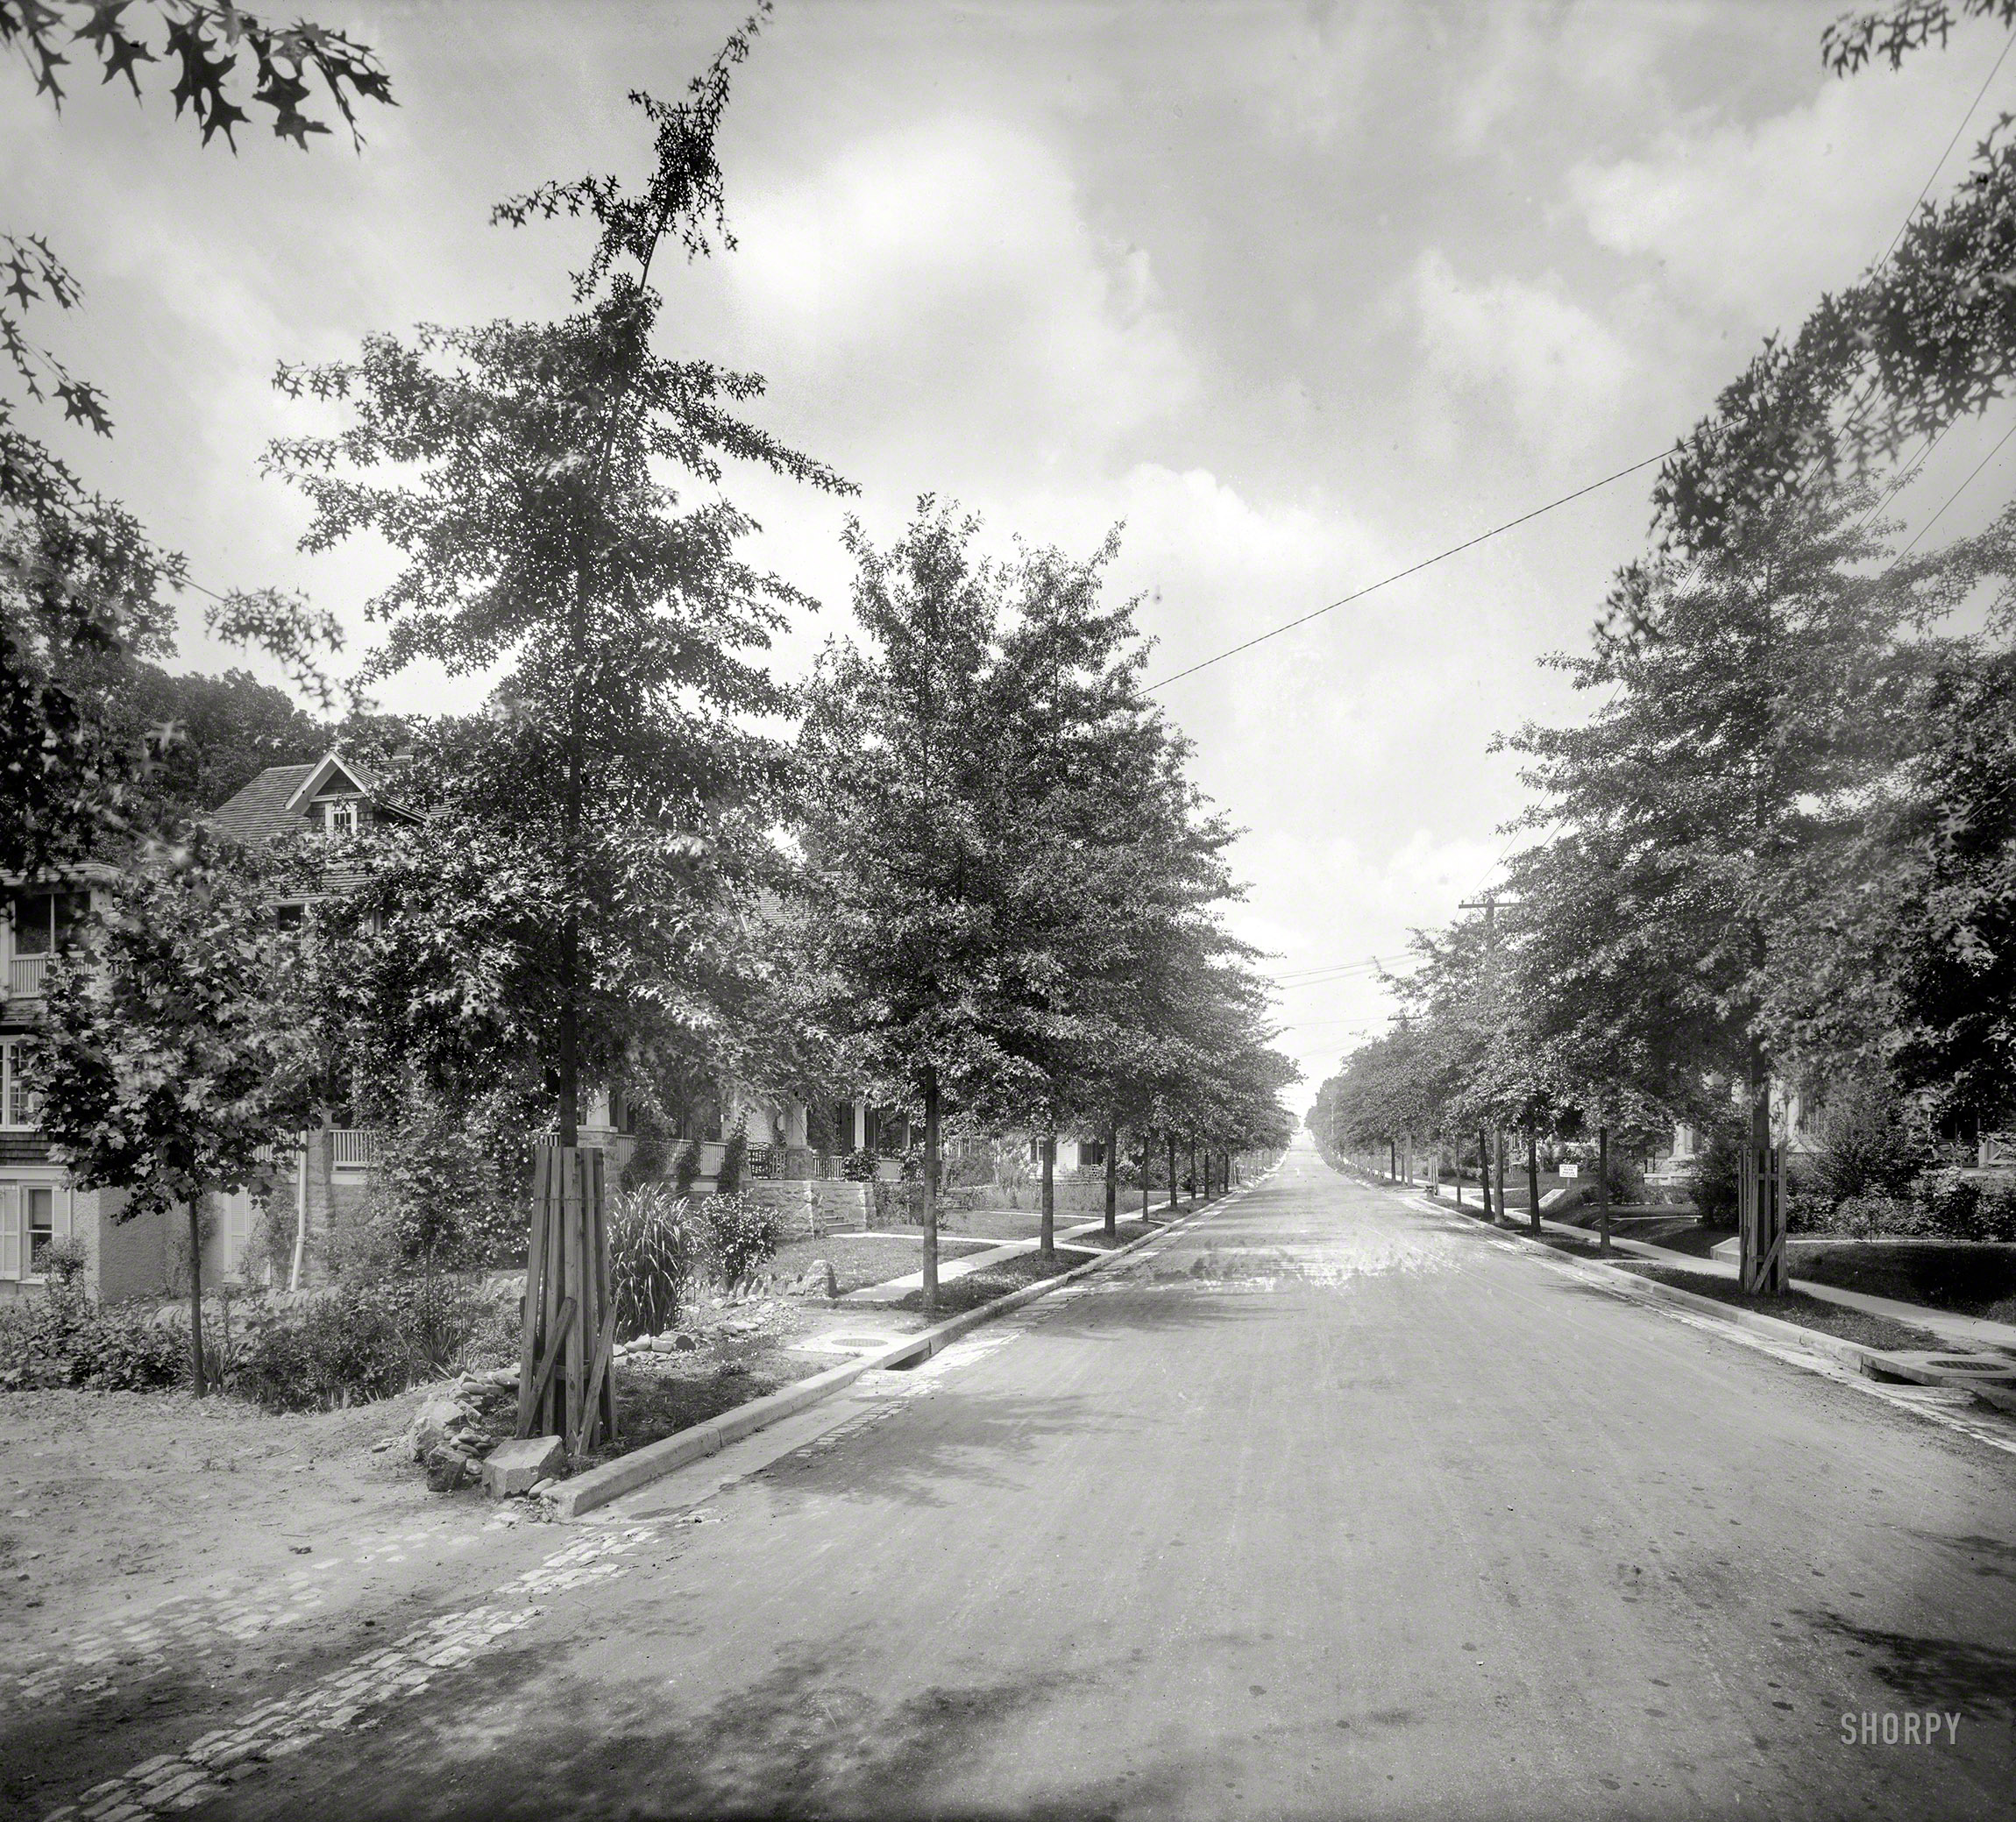 Washington, D.C., circa 1925. "Cathedral Avenue." 8x10 inch glass negative, National Photo Company Collection. View full size.